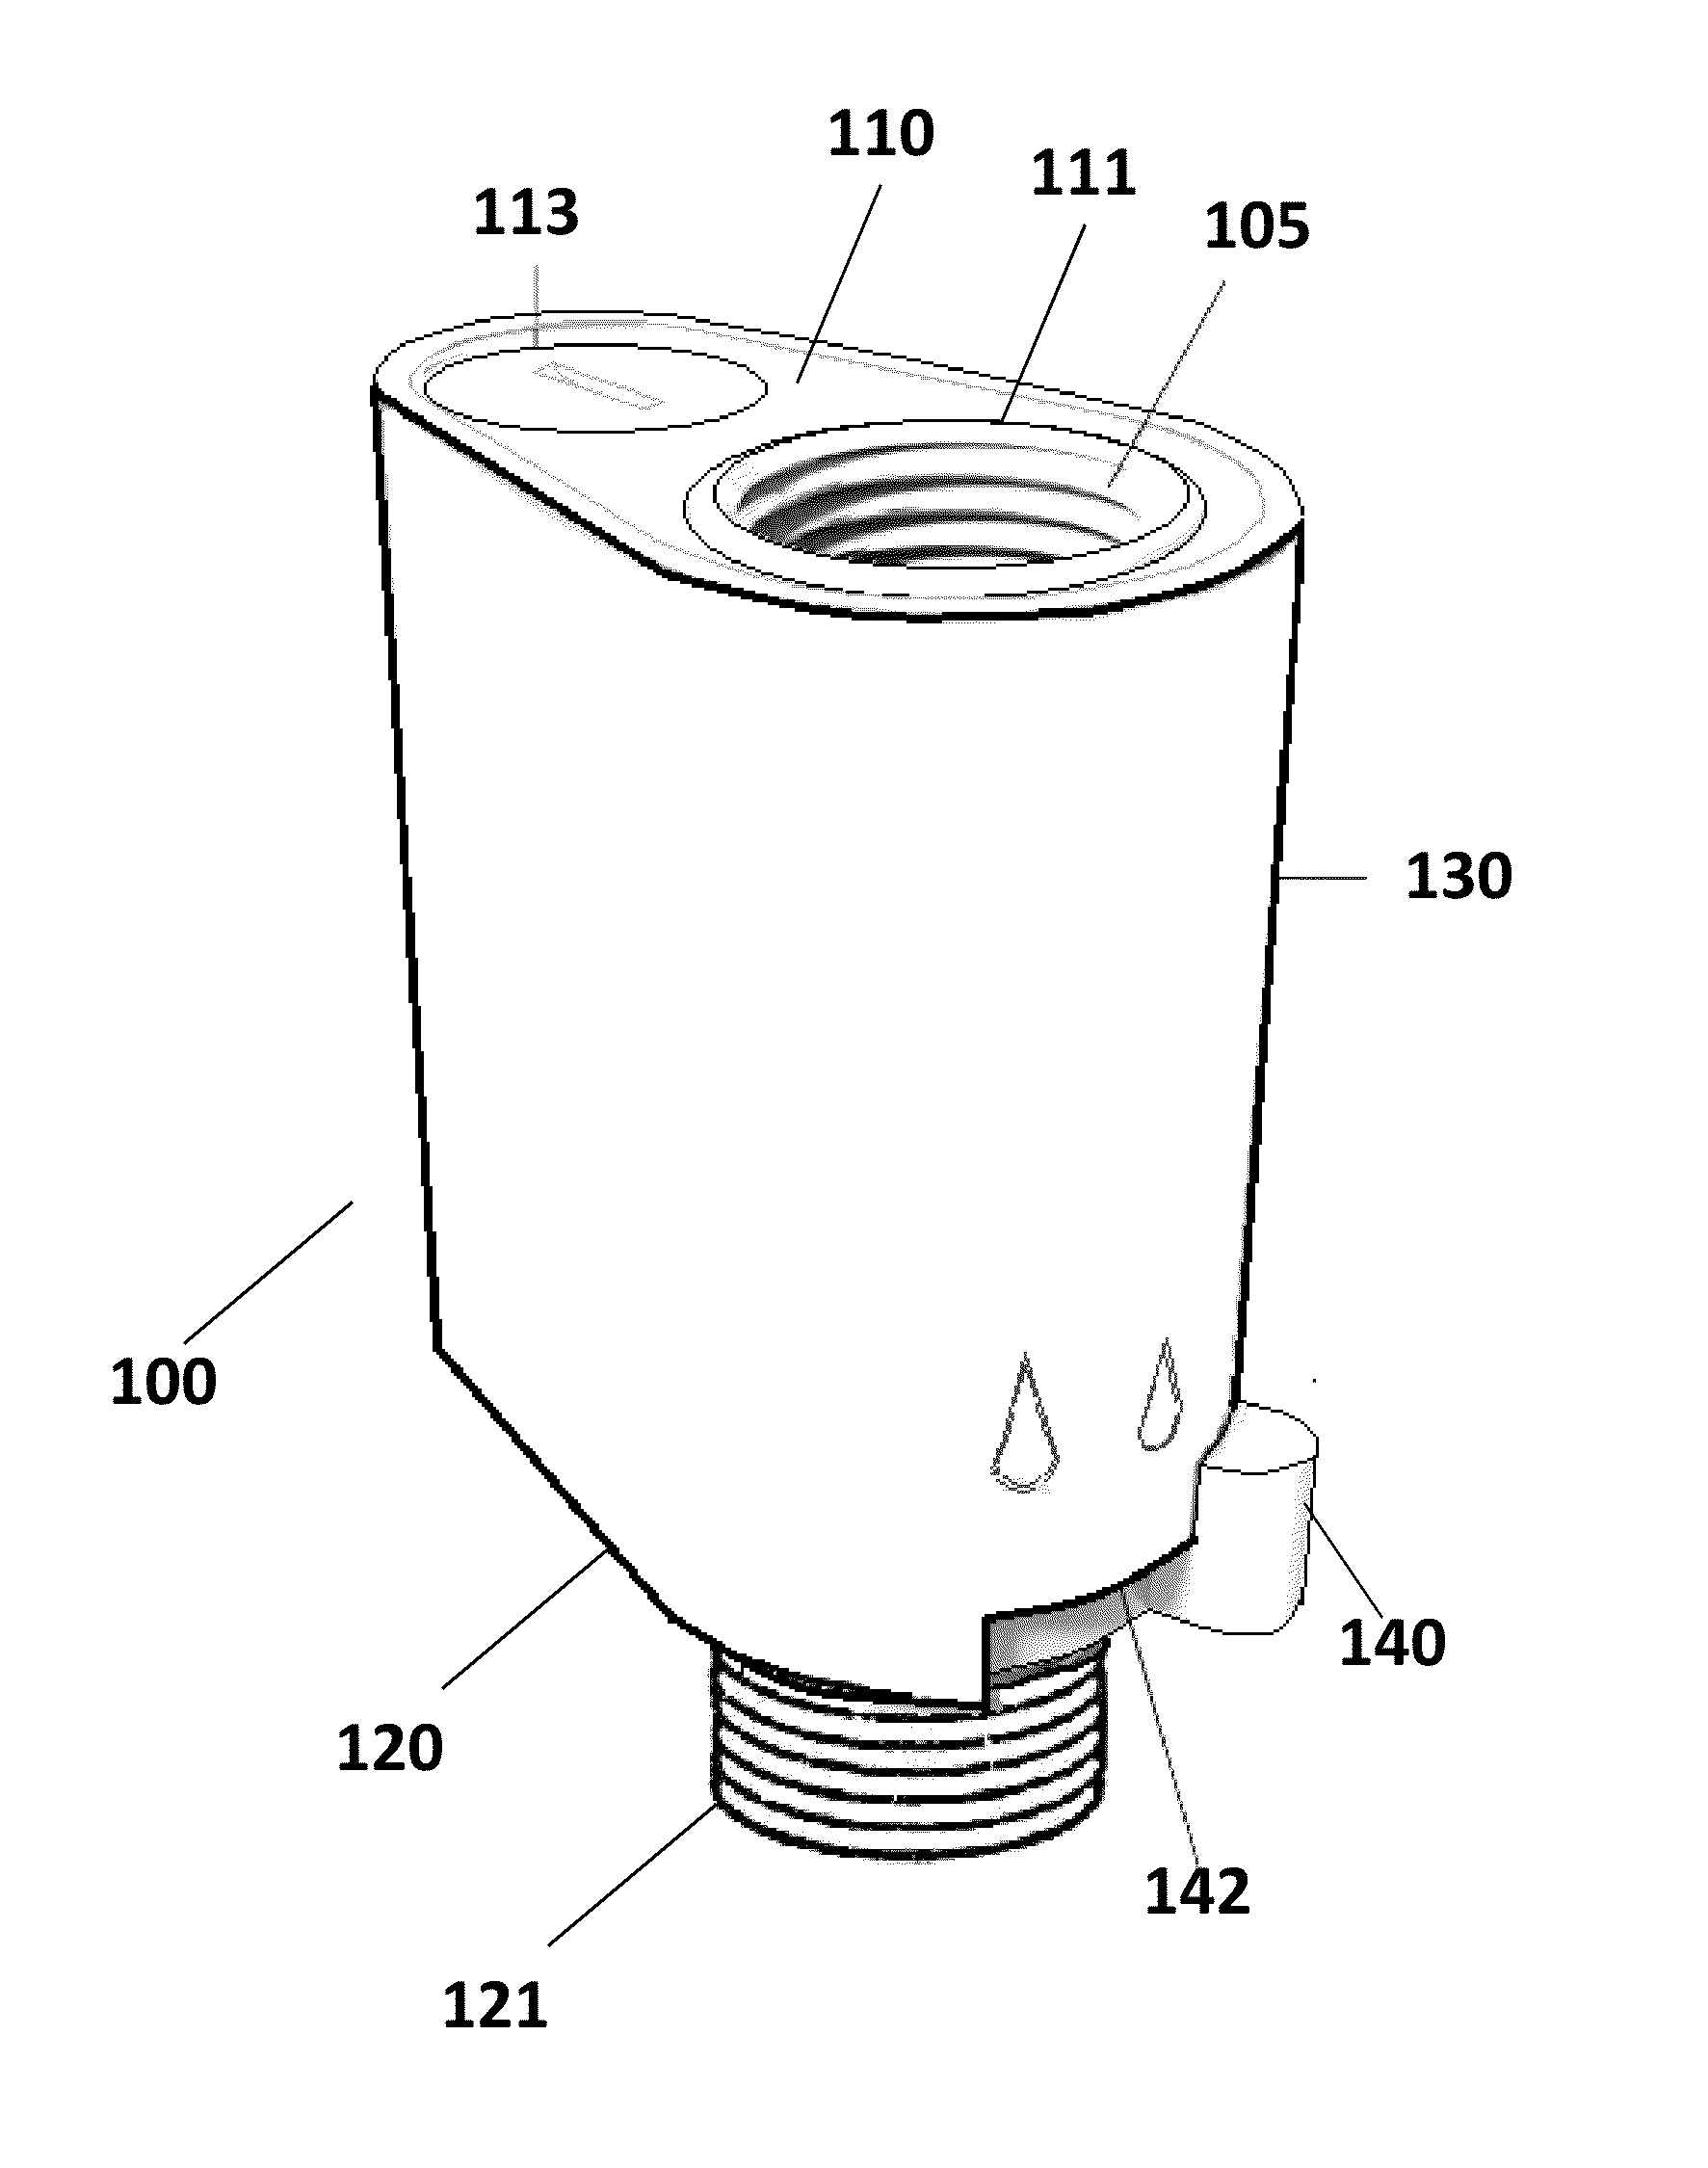 Network-Enabled Smart Shower Head Adapter